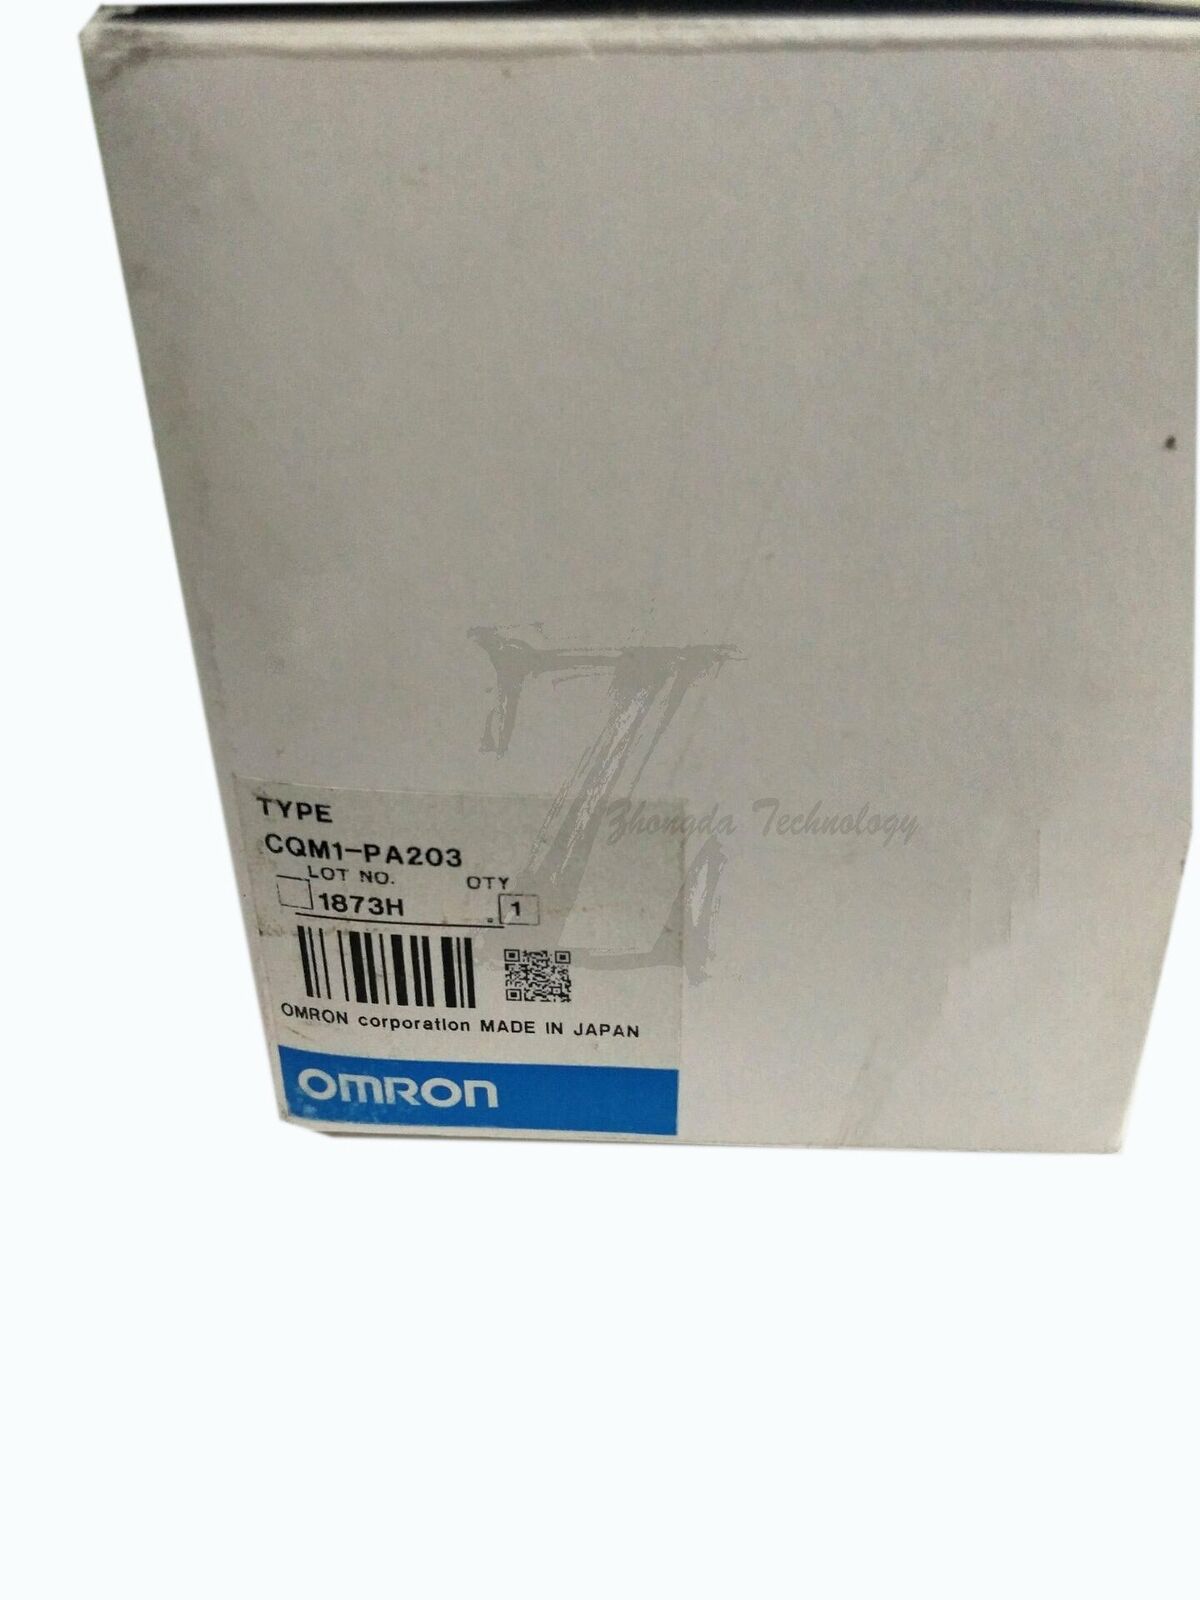 1pc new Omron CQM1-PA203 module one year warranty KOEED 101-200, 80%, import_2020_10_10_031751, Omron, Other